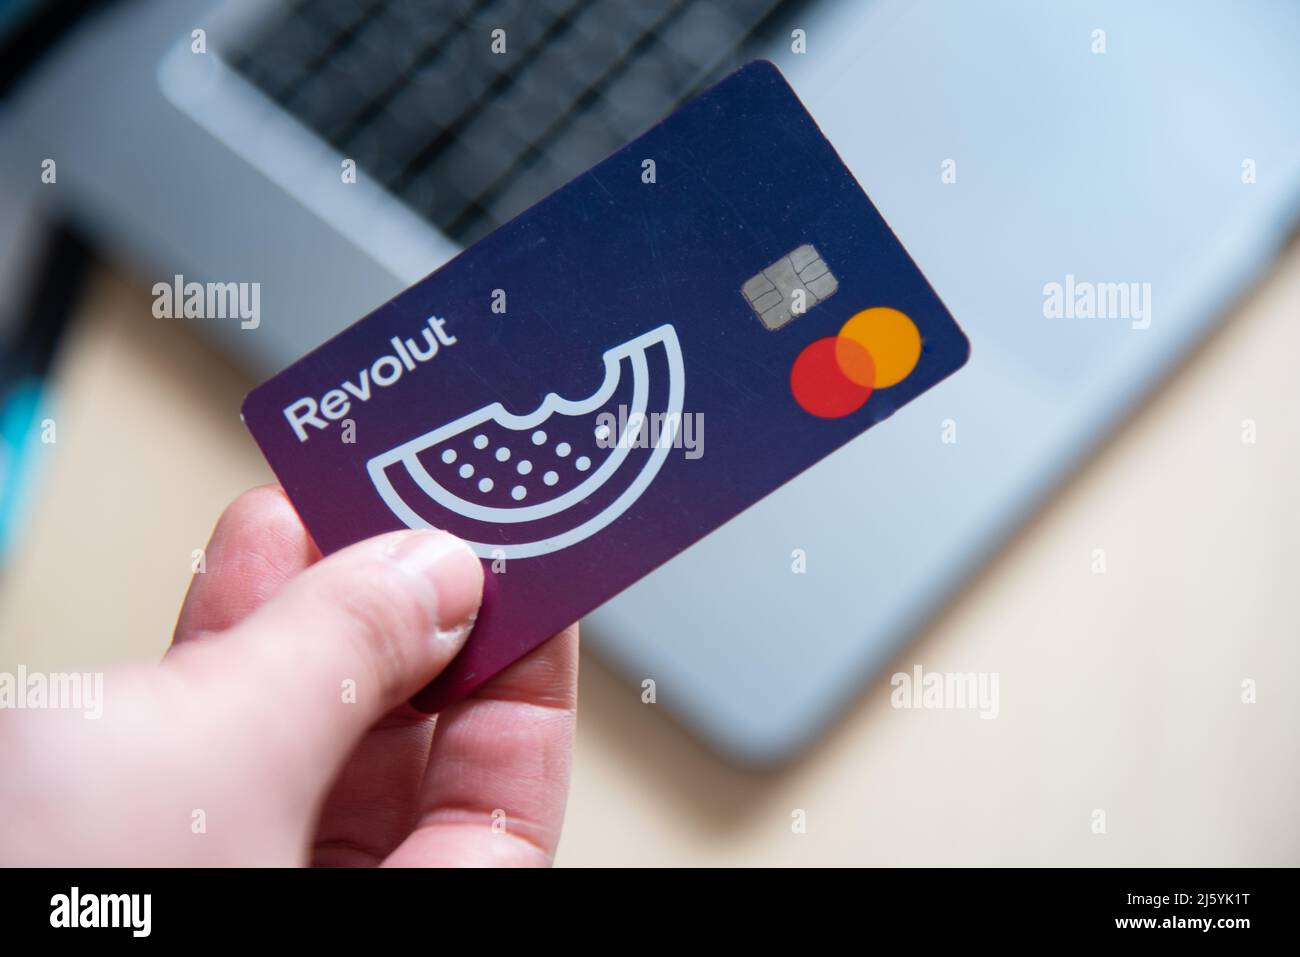 Human hand holding a revolut debit card. Mobile phone app digital payments online with laptop computer Stock Photo